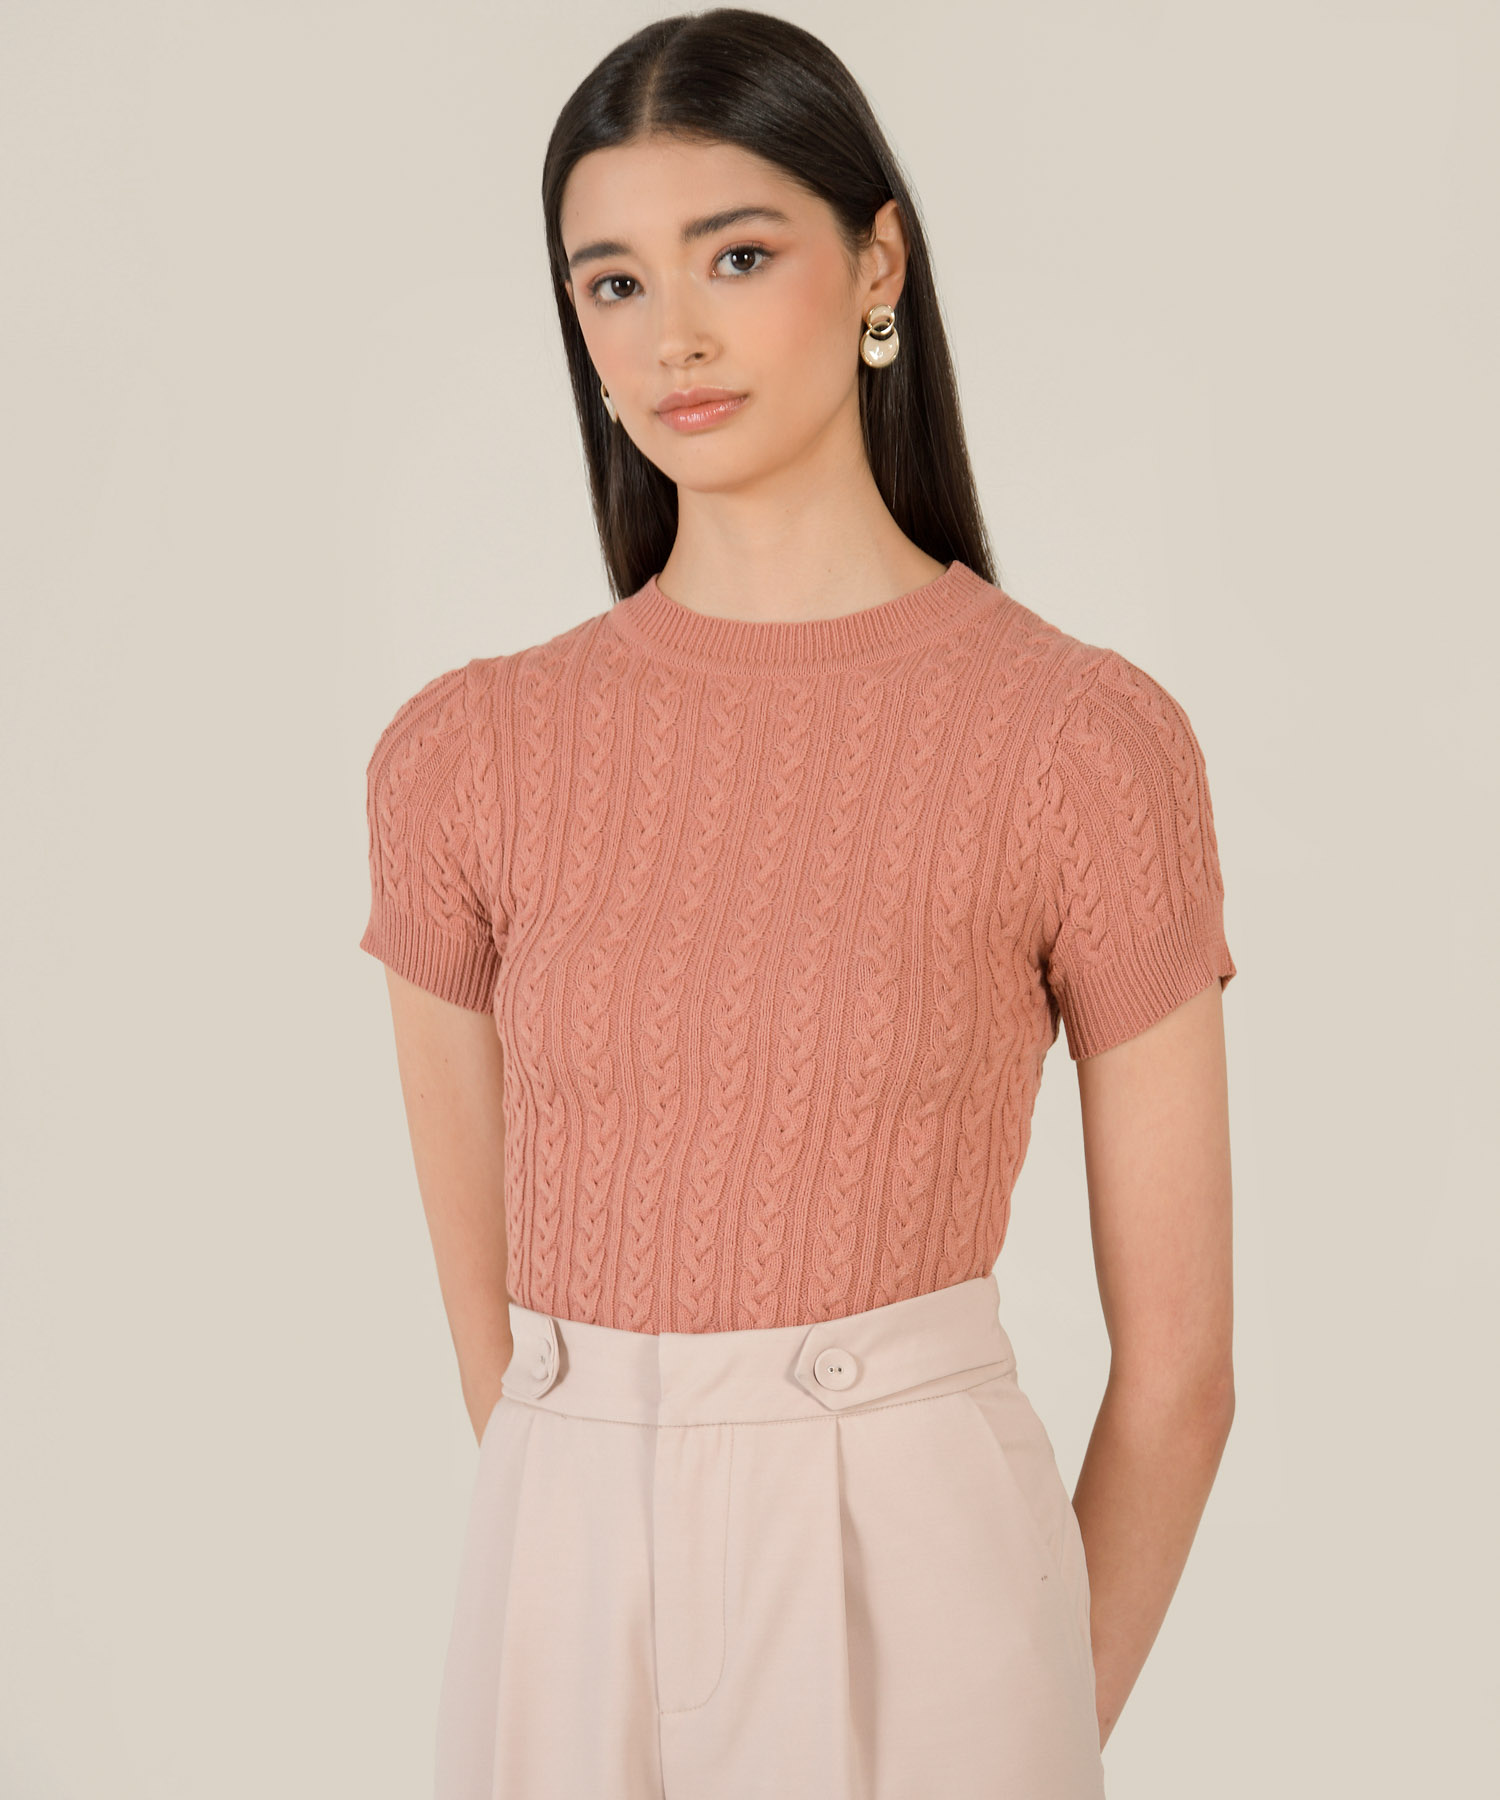 knitted women top online singapore